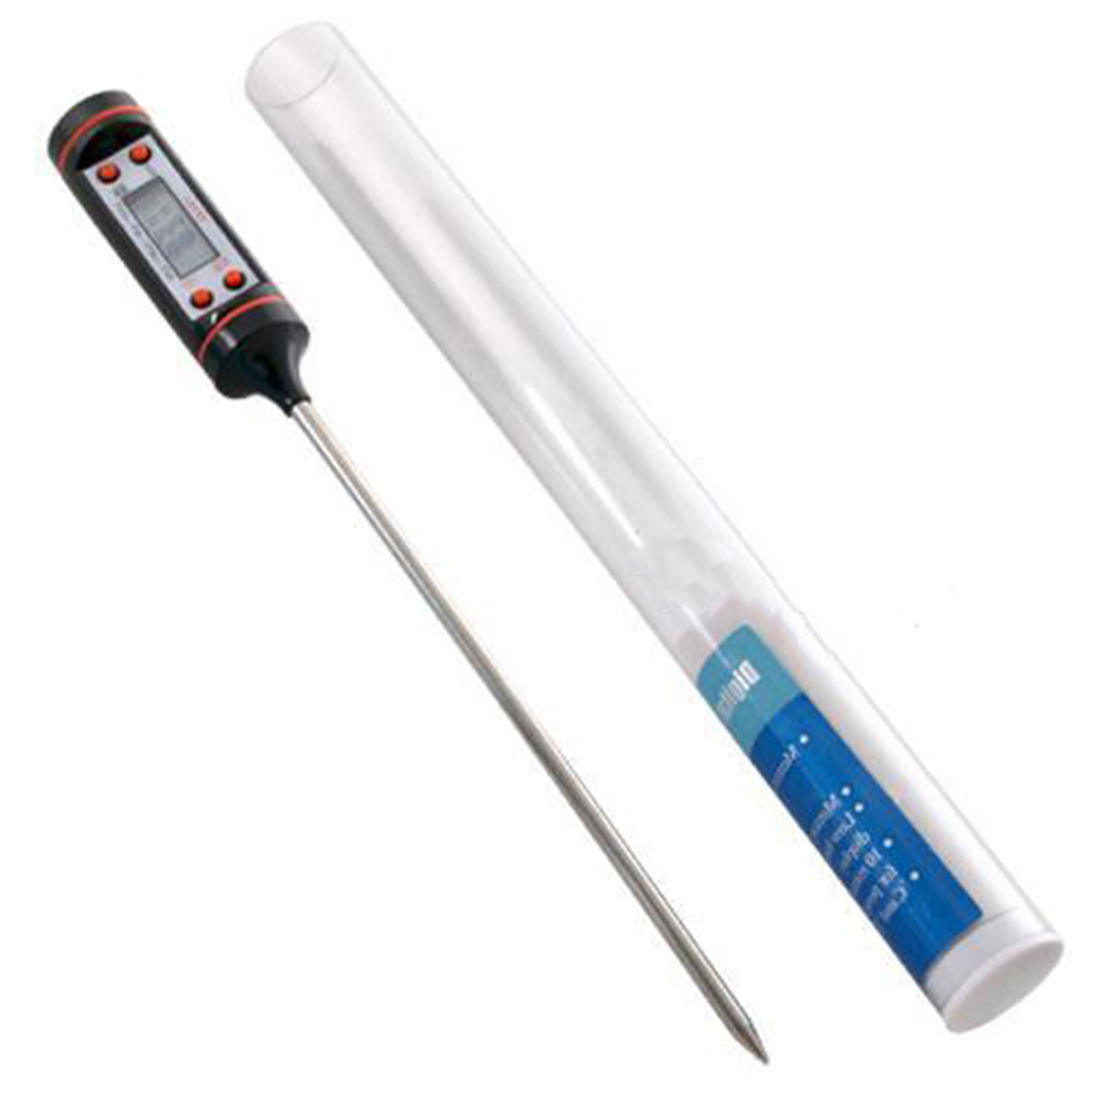 LCD Display Digital Probe Cooking Thermometer Food Temperature Sensor For BBQ Kitchen